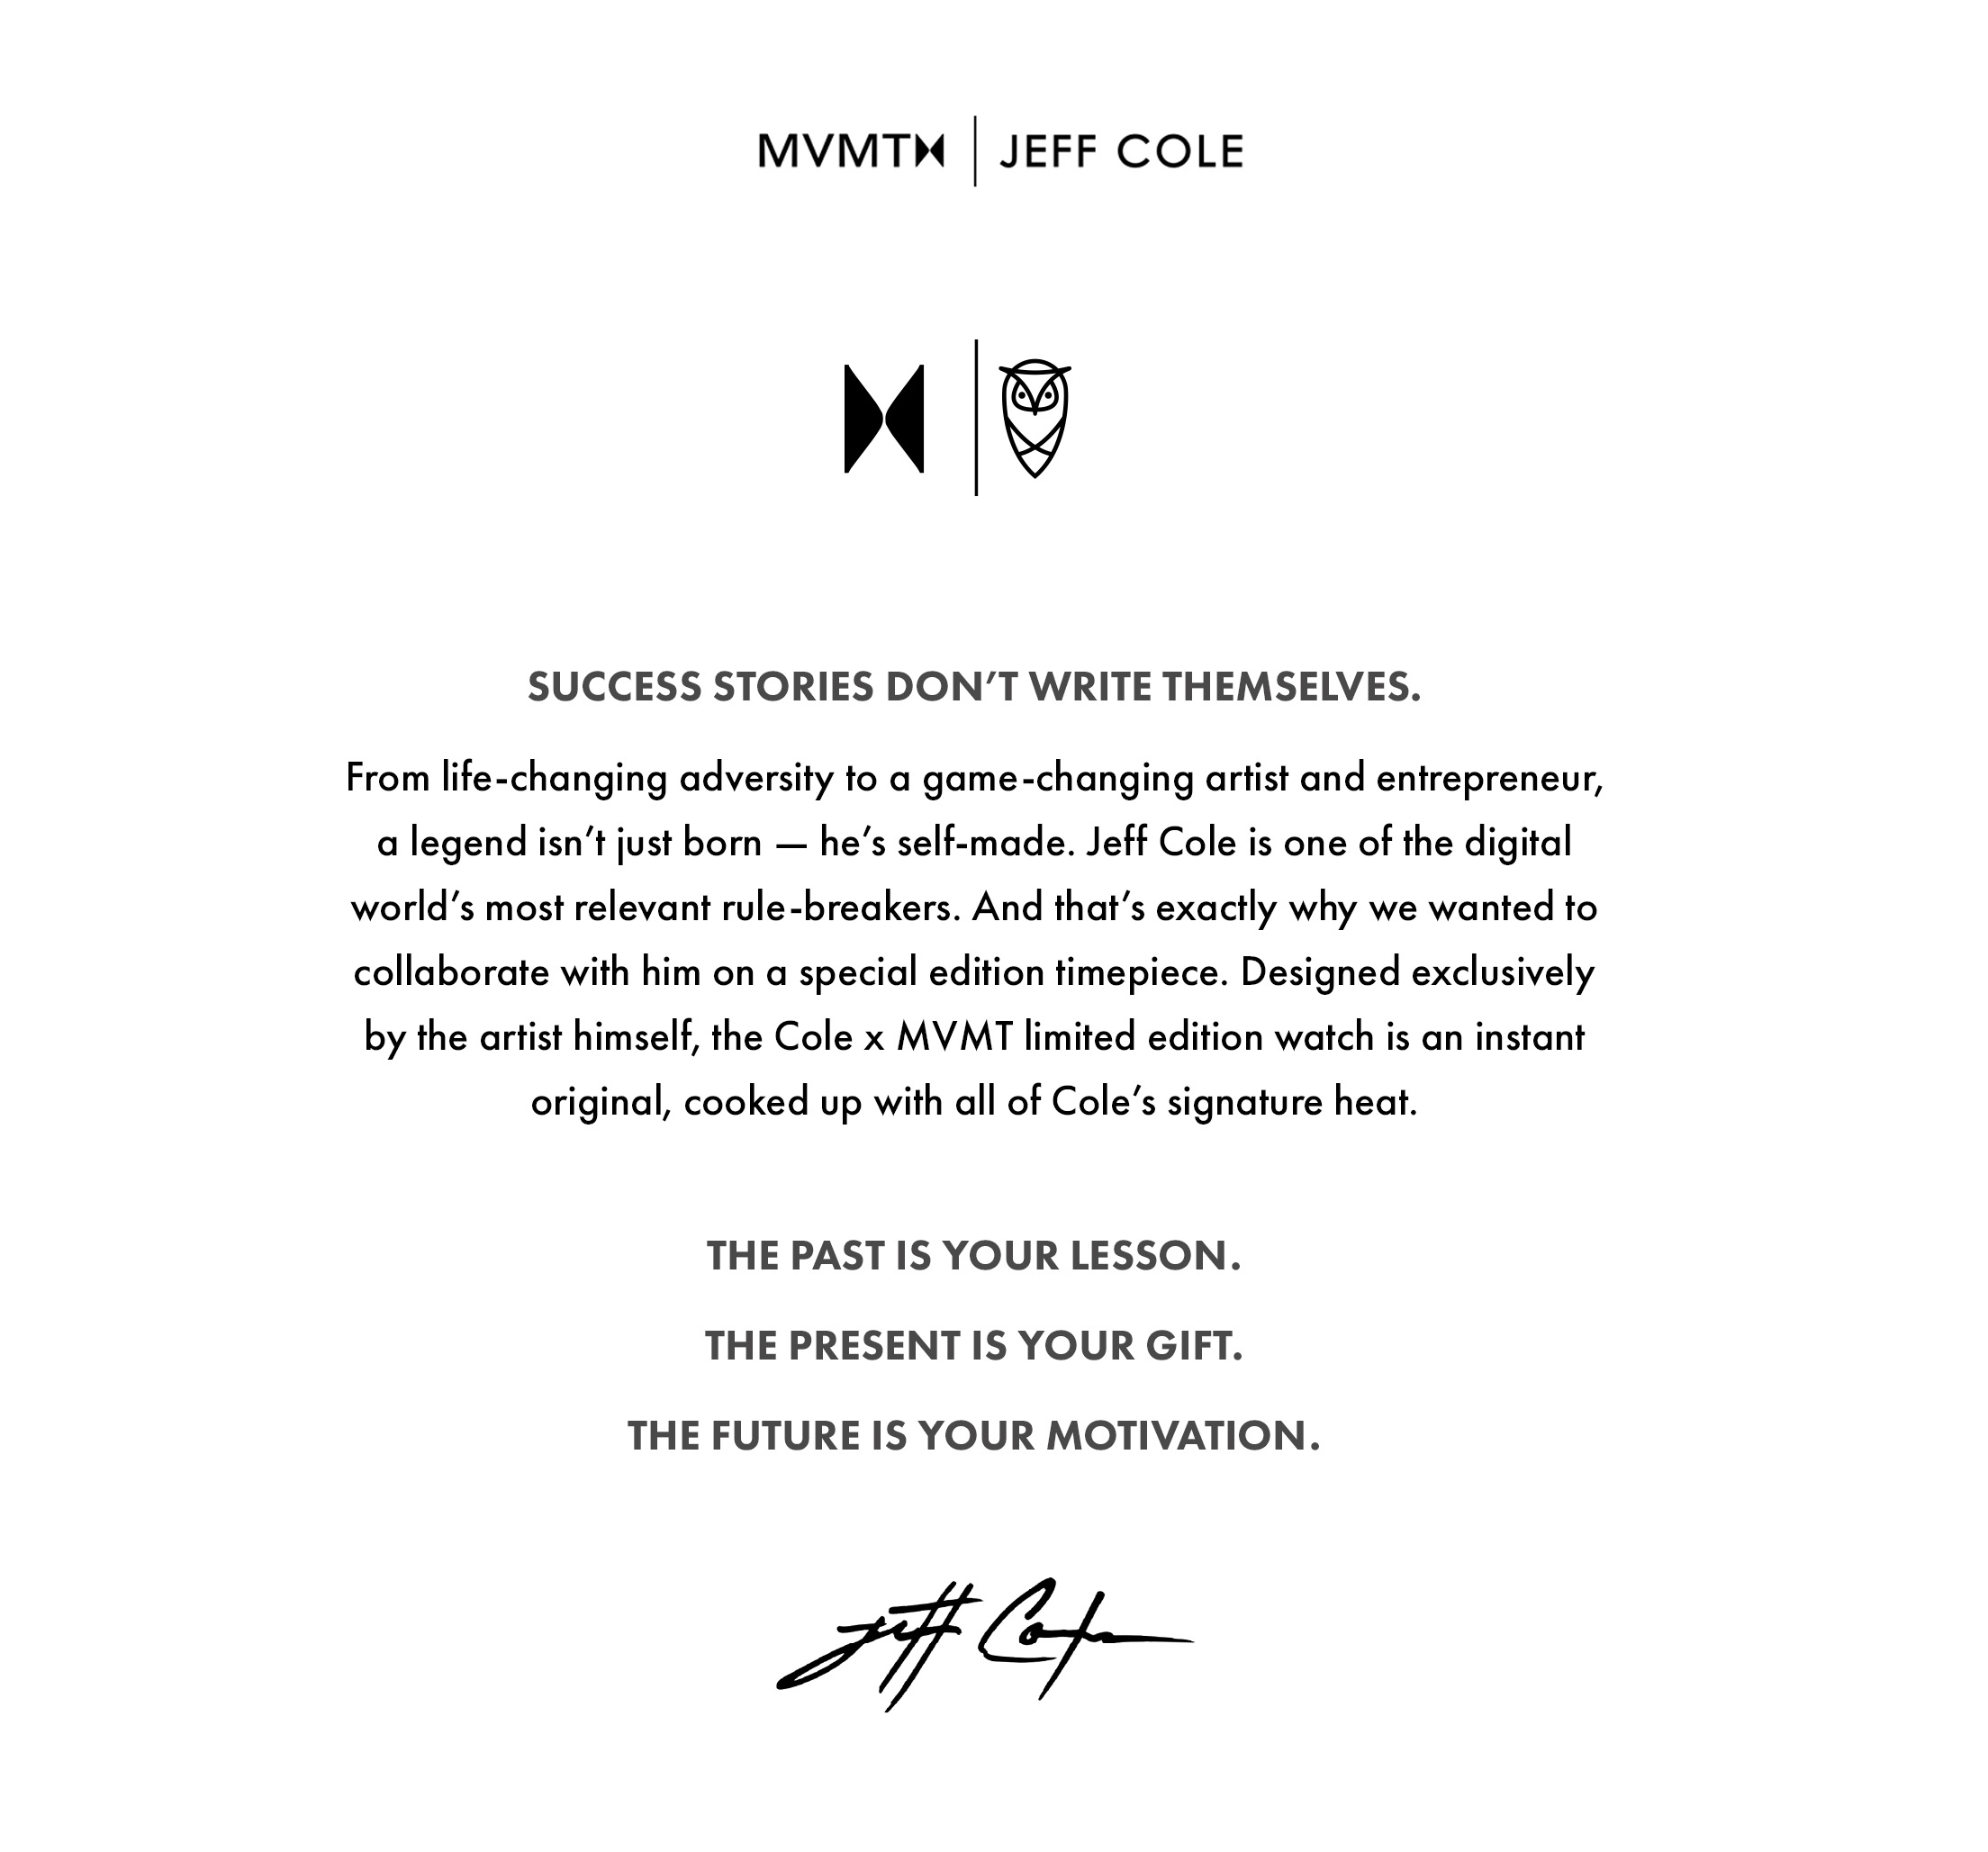 Success stories don't write themselves. From life-changing adversity to a game-changing artist and entrepreneur, a legend isn't just born - he's self-made. Jeff Cole is one of the digital world's most relevant rule-breakers. And that's exactly why we wanted to collaborate with him on a special edition timepiece. Designed exclusively by the artist himself, the Cole x MVMT limited edition watch is an instant original, cooked up with all of Cole's signature heat. The past is your lesson. The present is your gift. The future is your motivation. Jeff Cole.